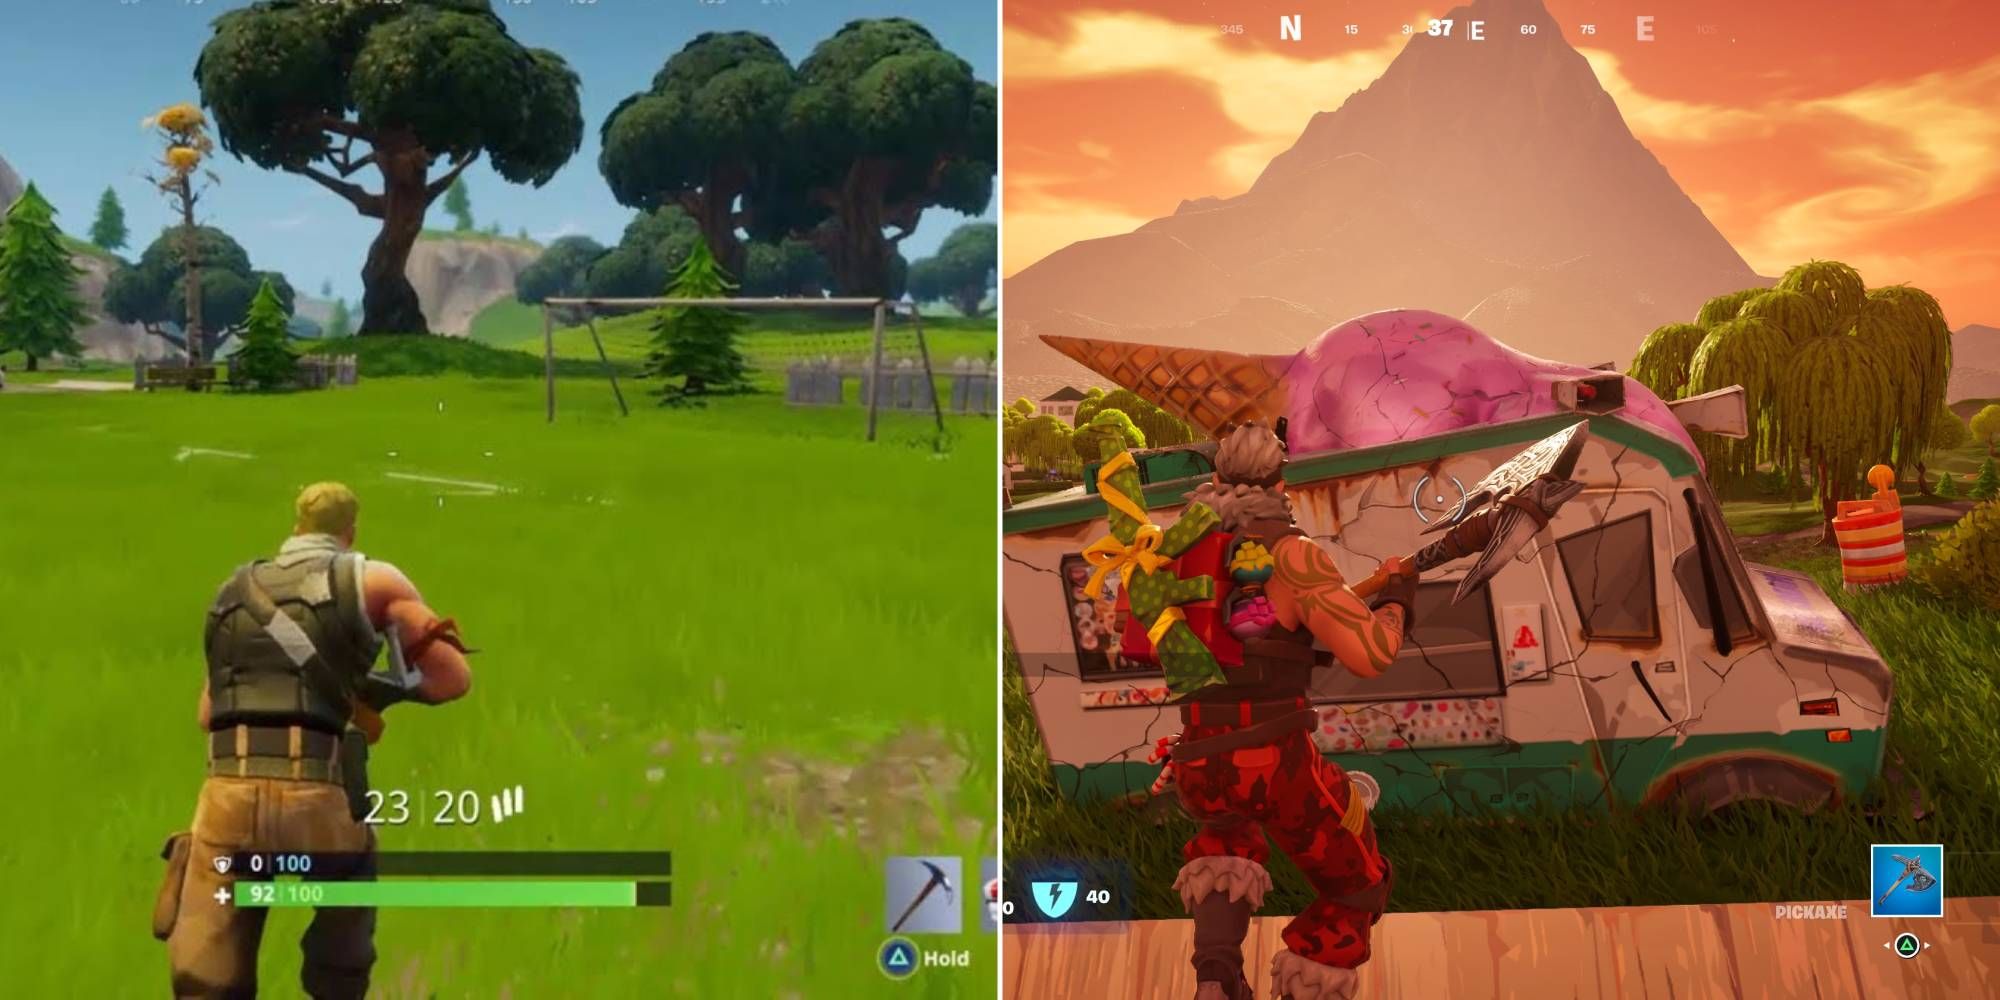 A comparison of a player in Fortnite for PS4 in 2017 and for PS5 in 2023.